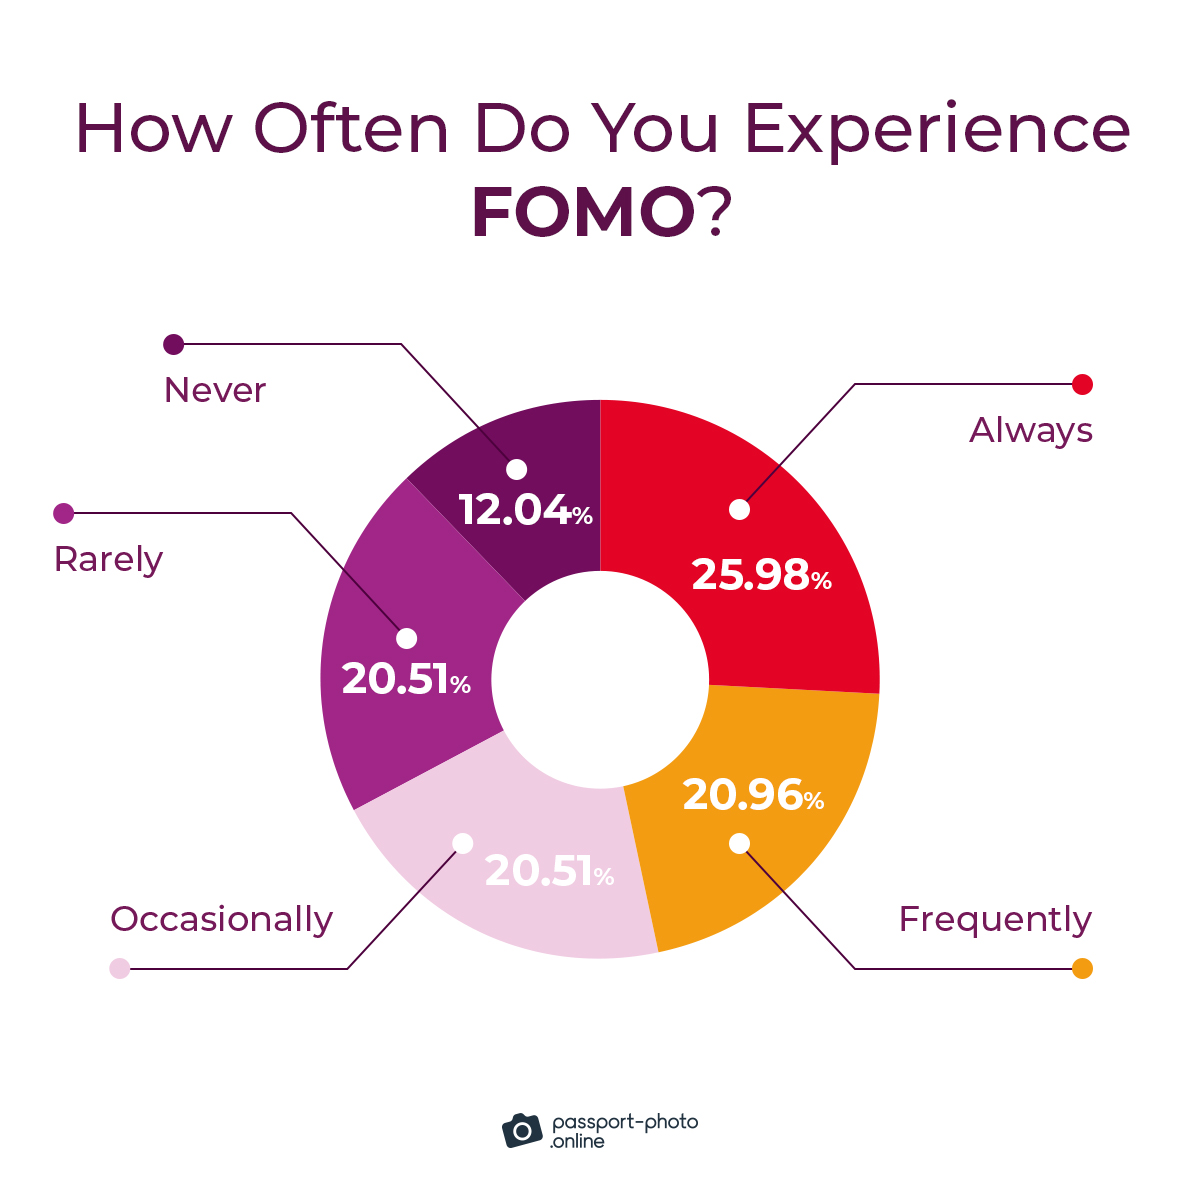 only 12% of digital nomads have never experienced FOMO